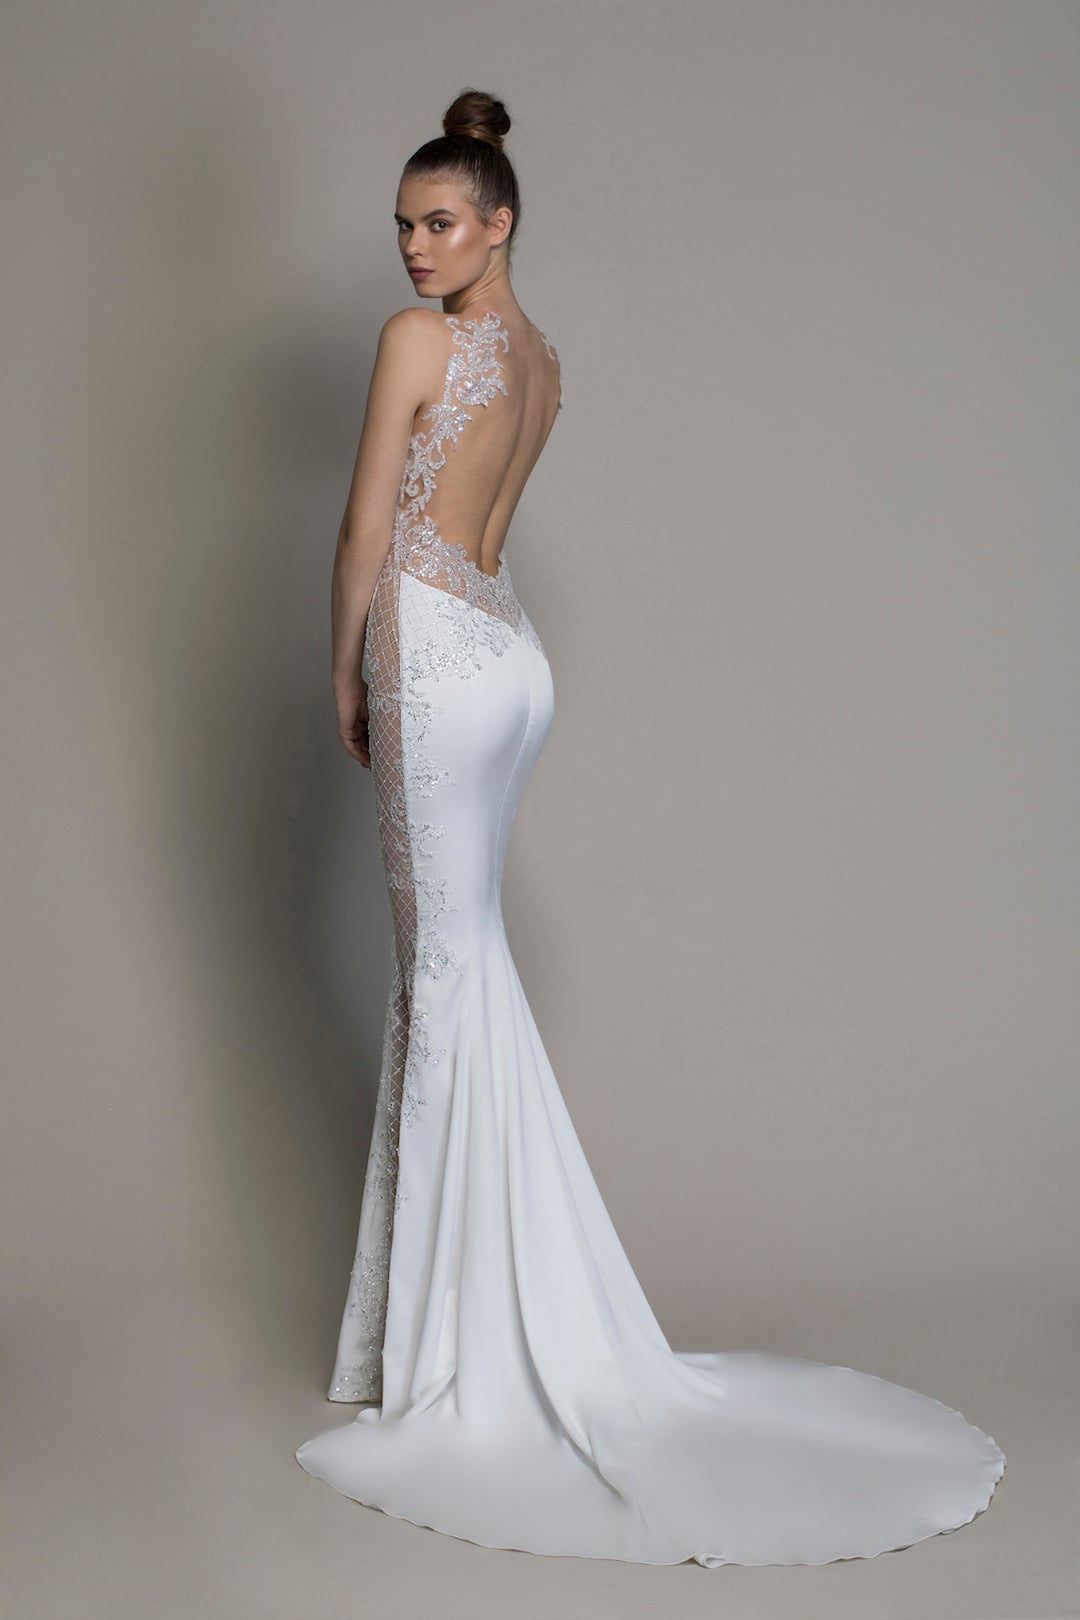 Pnina Tornai's new LOVE 2020 Collection is out! This is style 14768